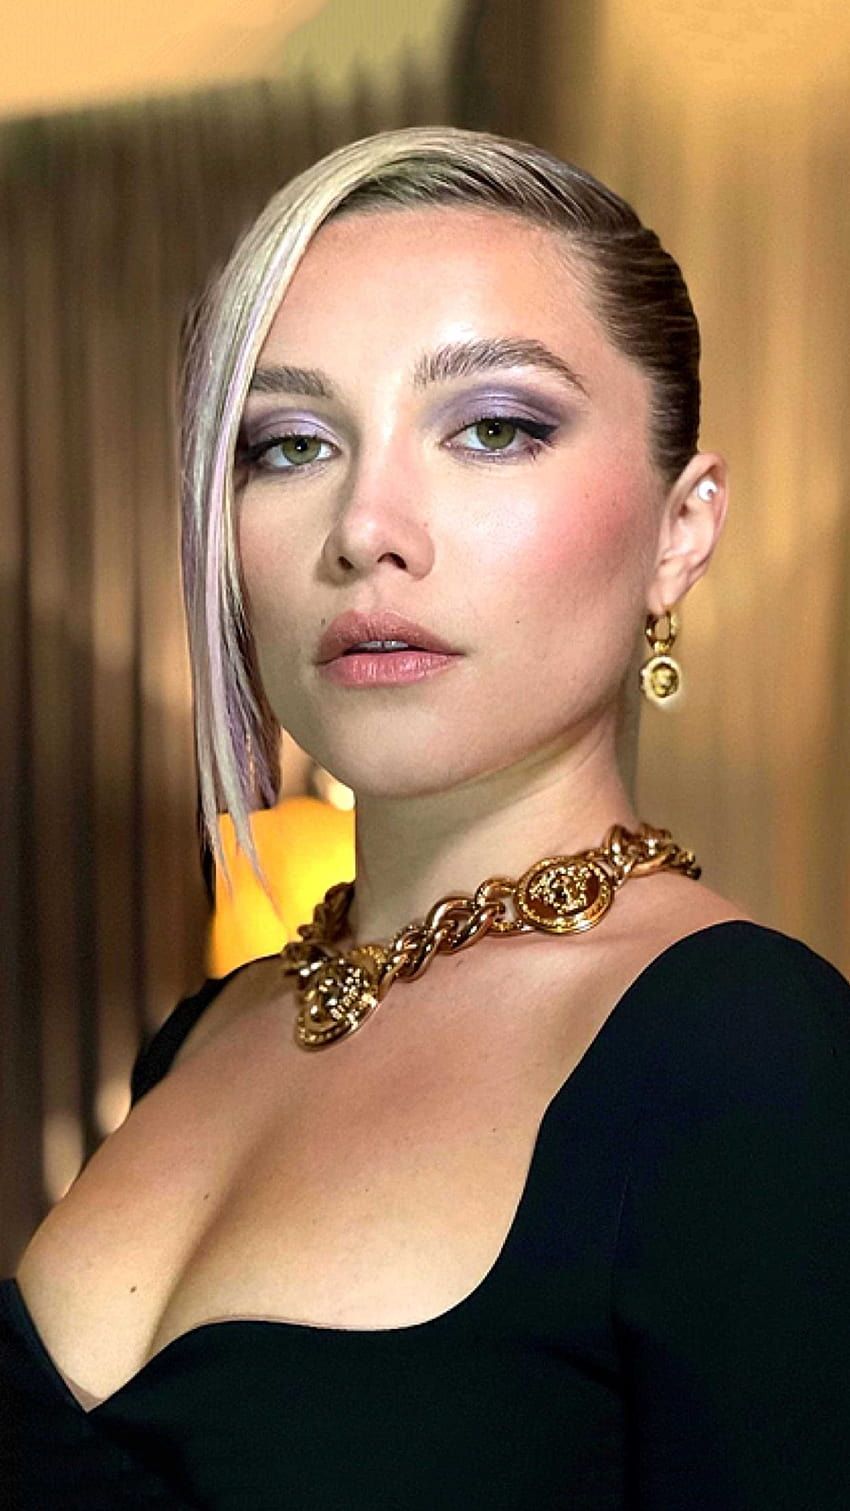 Florence Pugh wears a black dress and gold jewelry at the 2020 Golden Globes - Florence Pugh